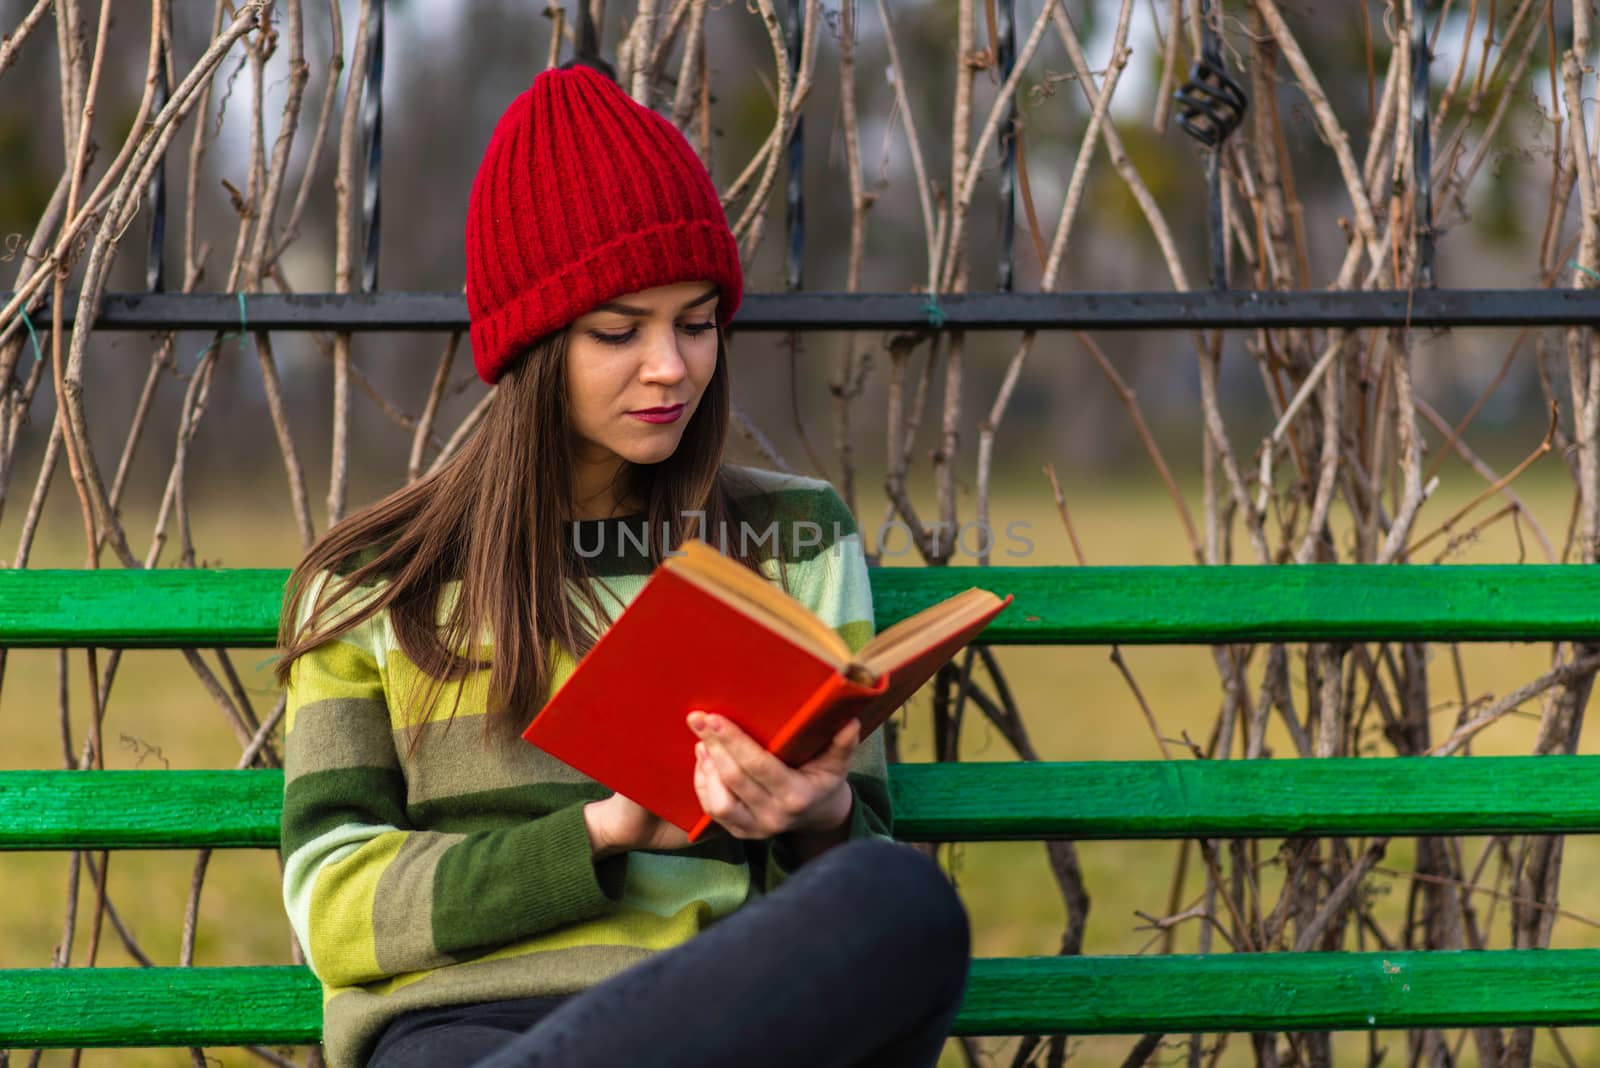 Teenager girl in red hat and green sweater sitting on a bench in a park and reading a book with red cover.